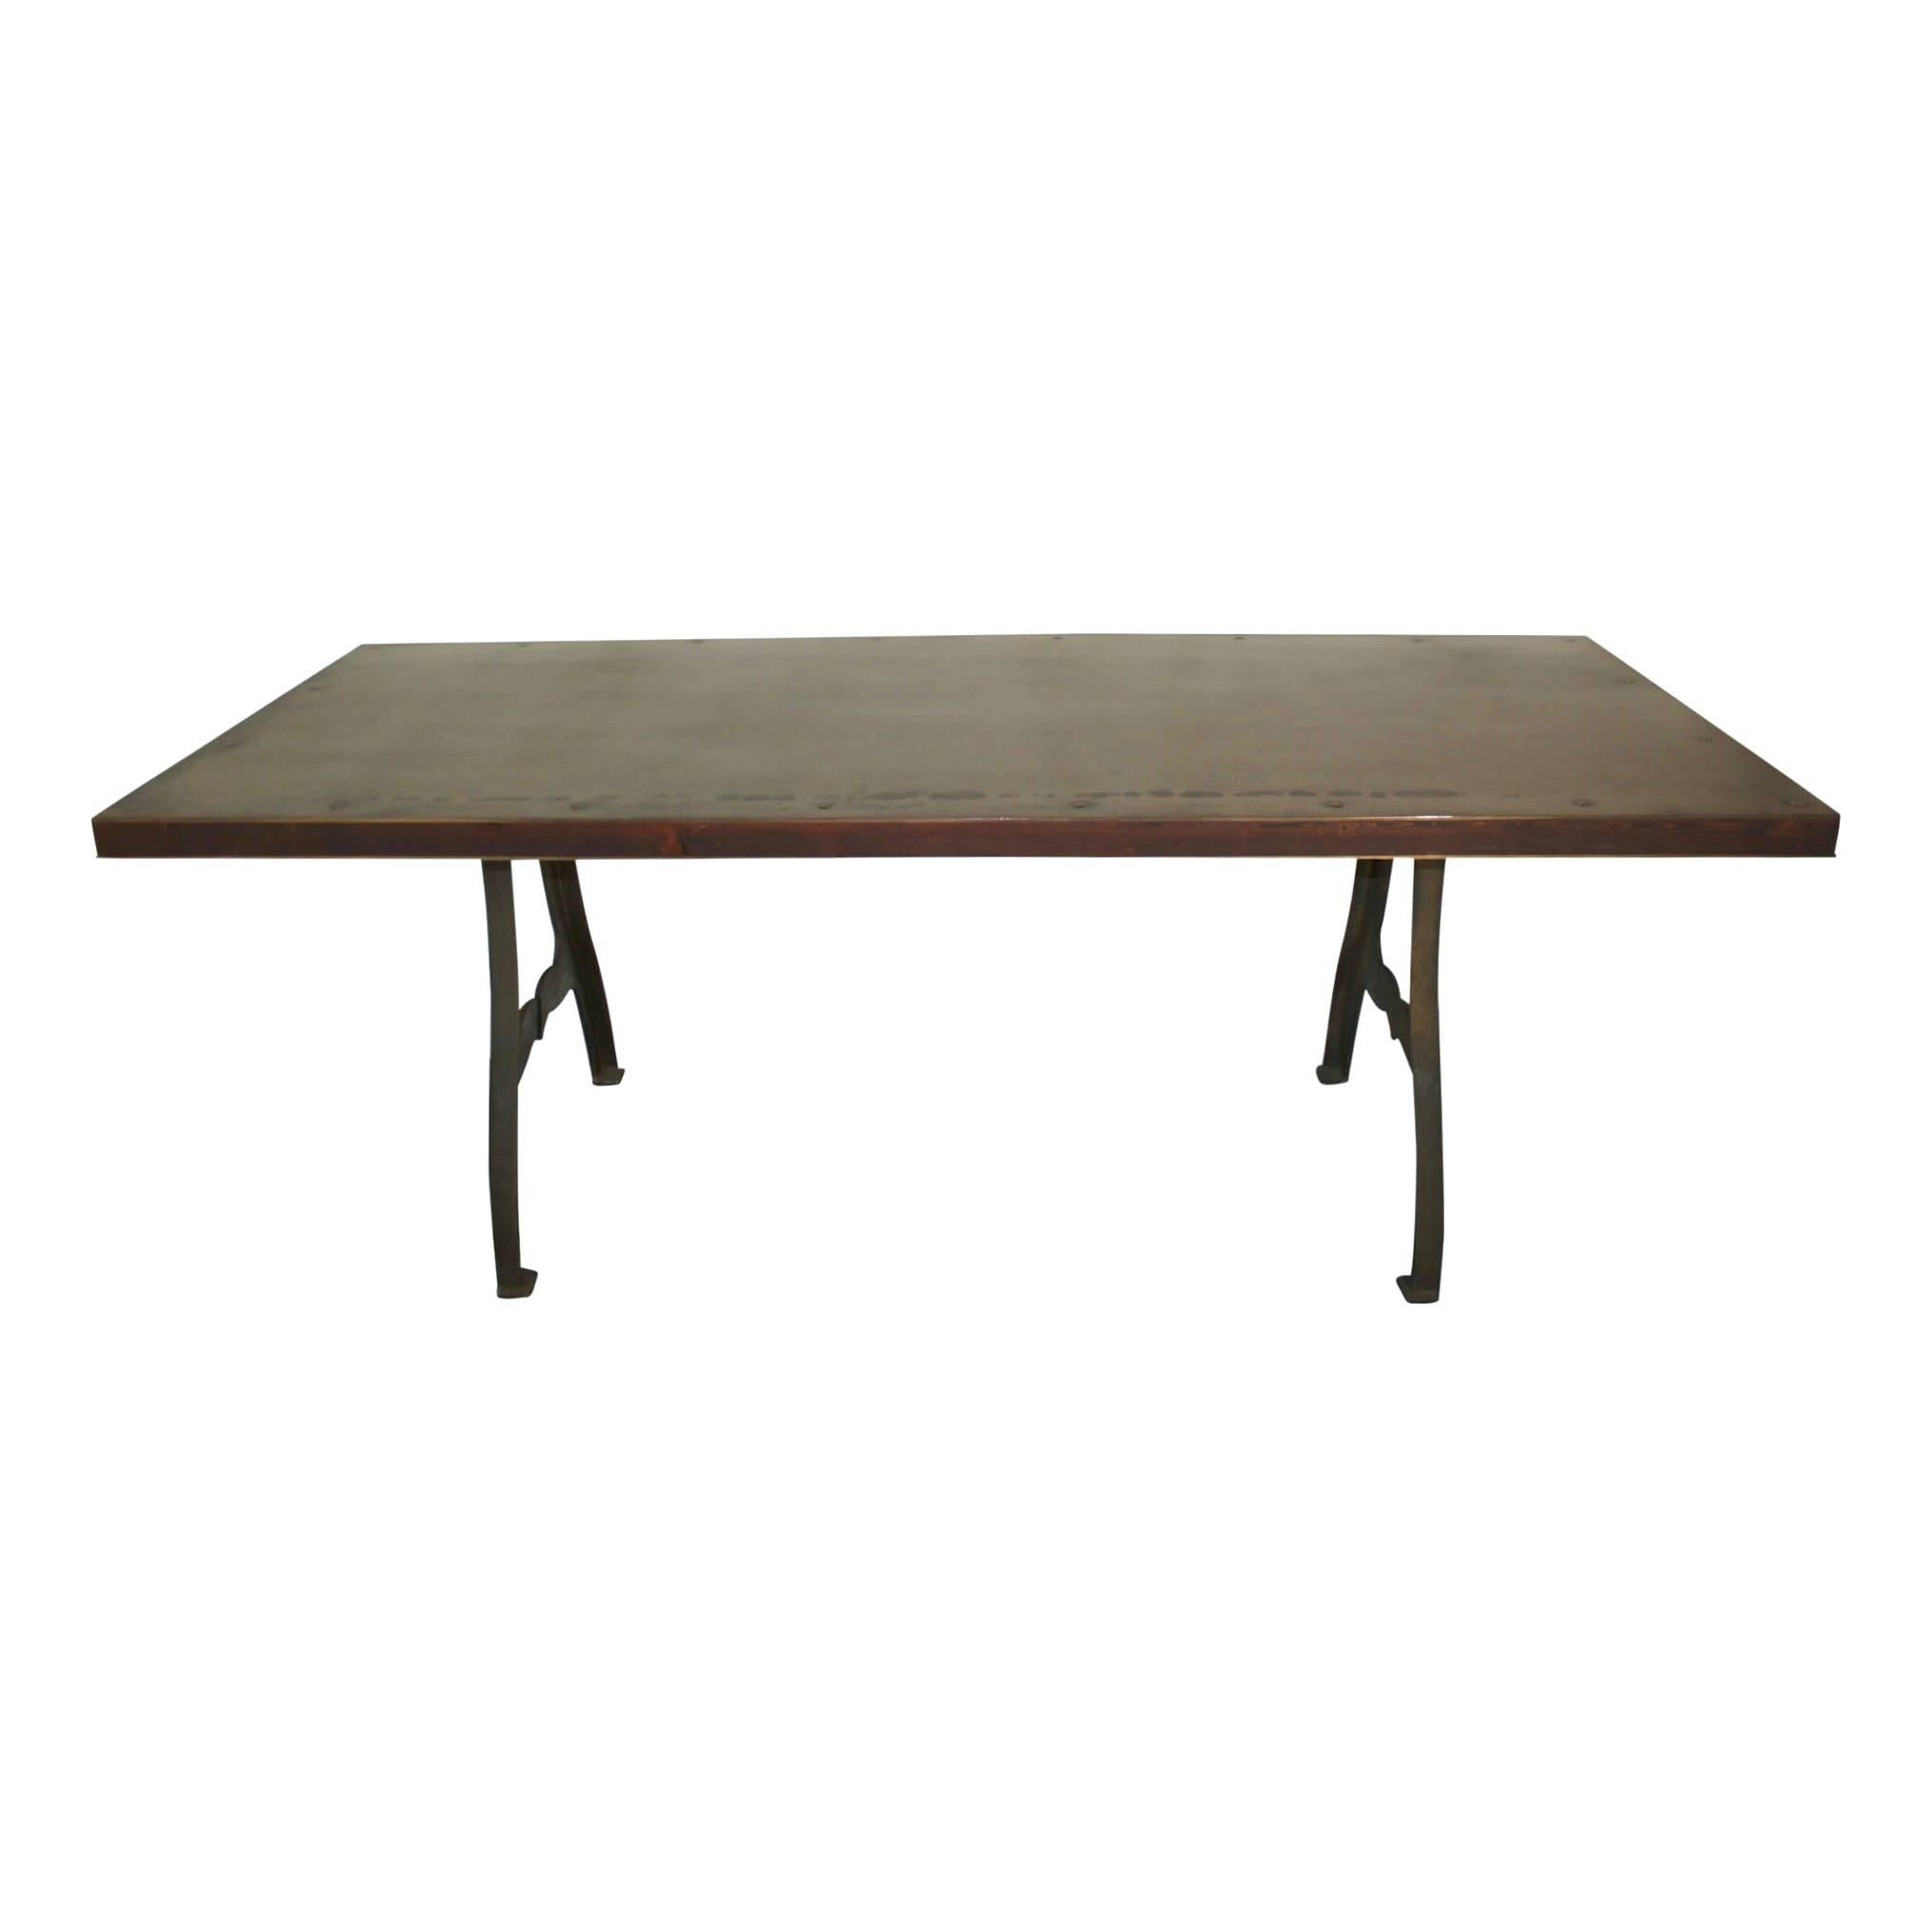 Fashioned from machine legs, reclaimed wood, and a steel top this no-nonsense, seven foot table is sure to please. The legs are cast iron reproductions of legs manufactured in New York during the 19th century. New York, N.Y. USA is embossed and